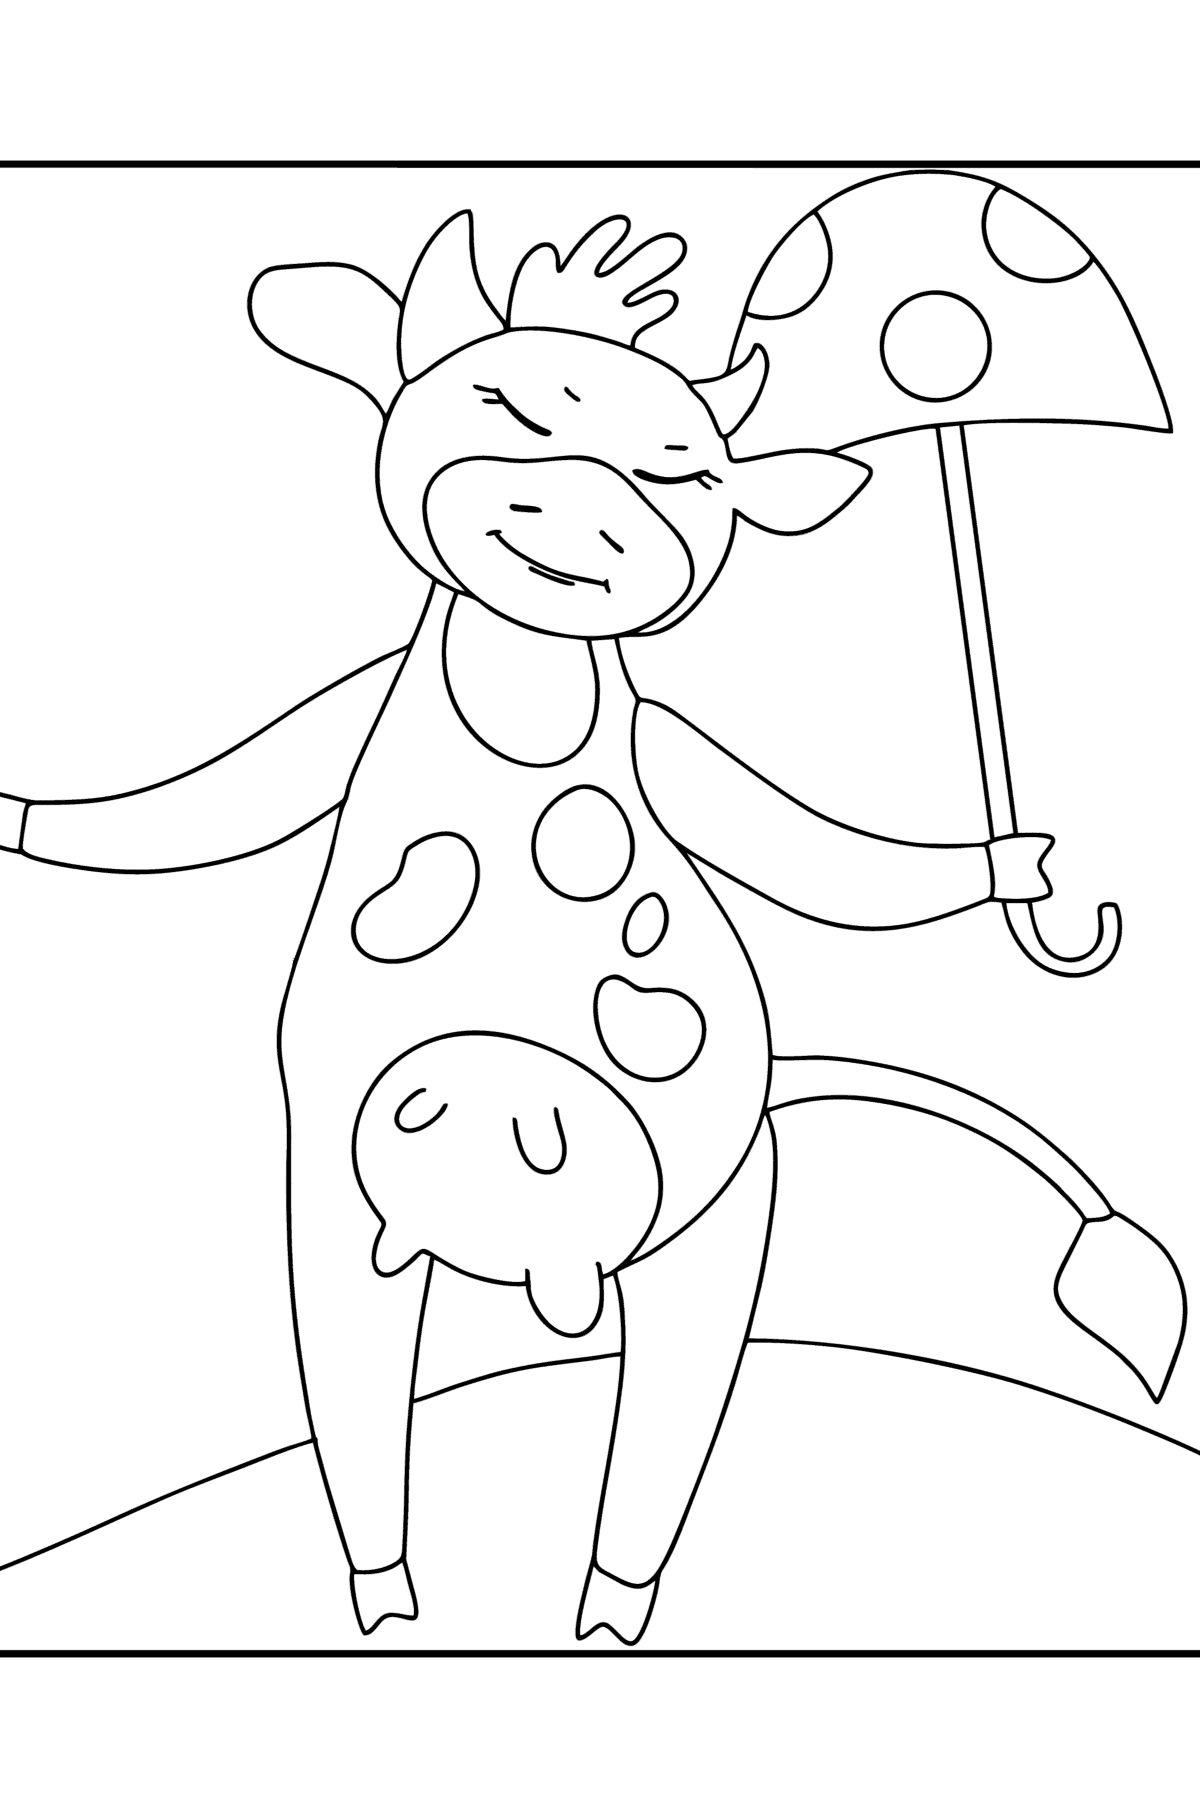 Lola Cow coloring page - Coloring Pages for Kids